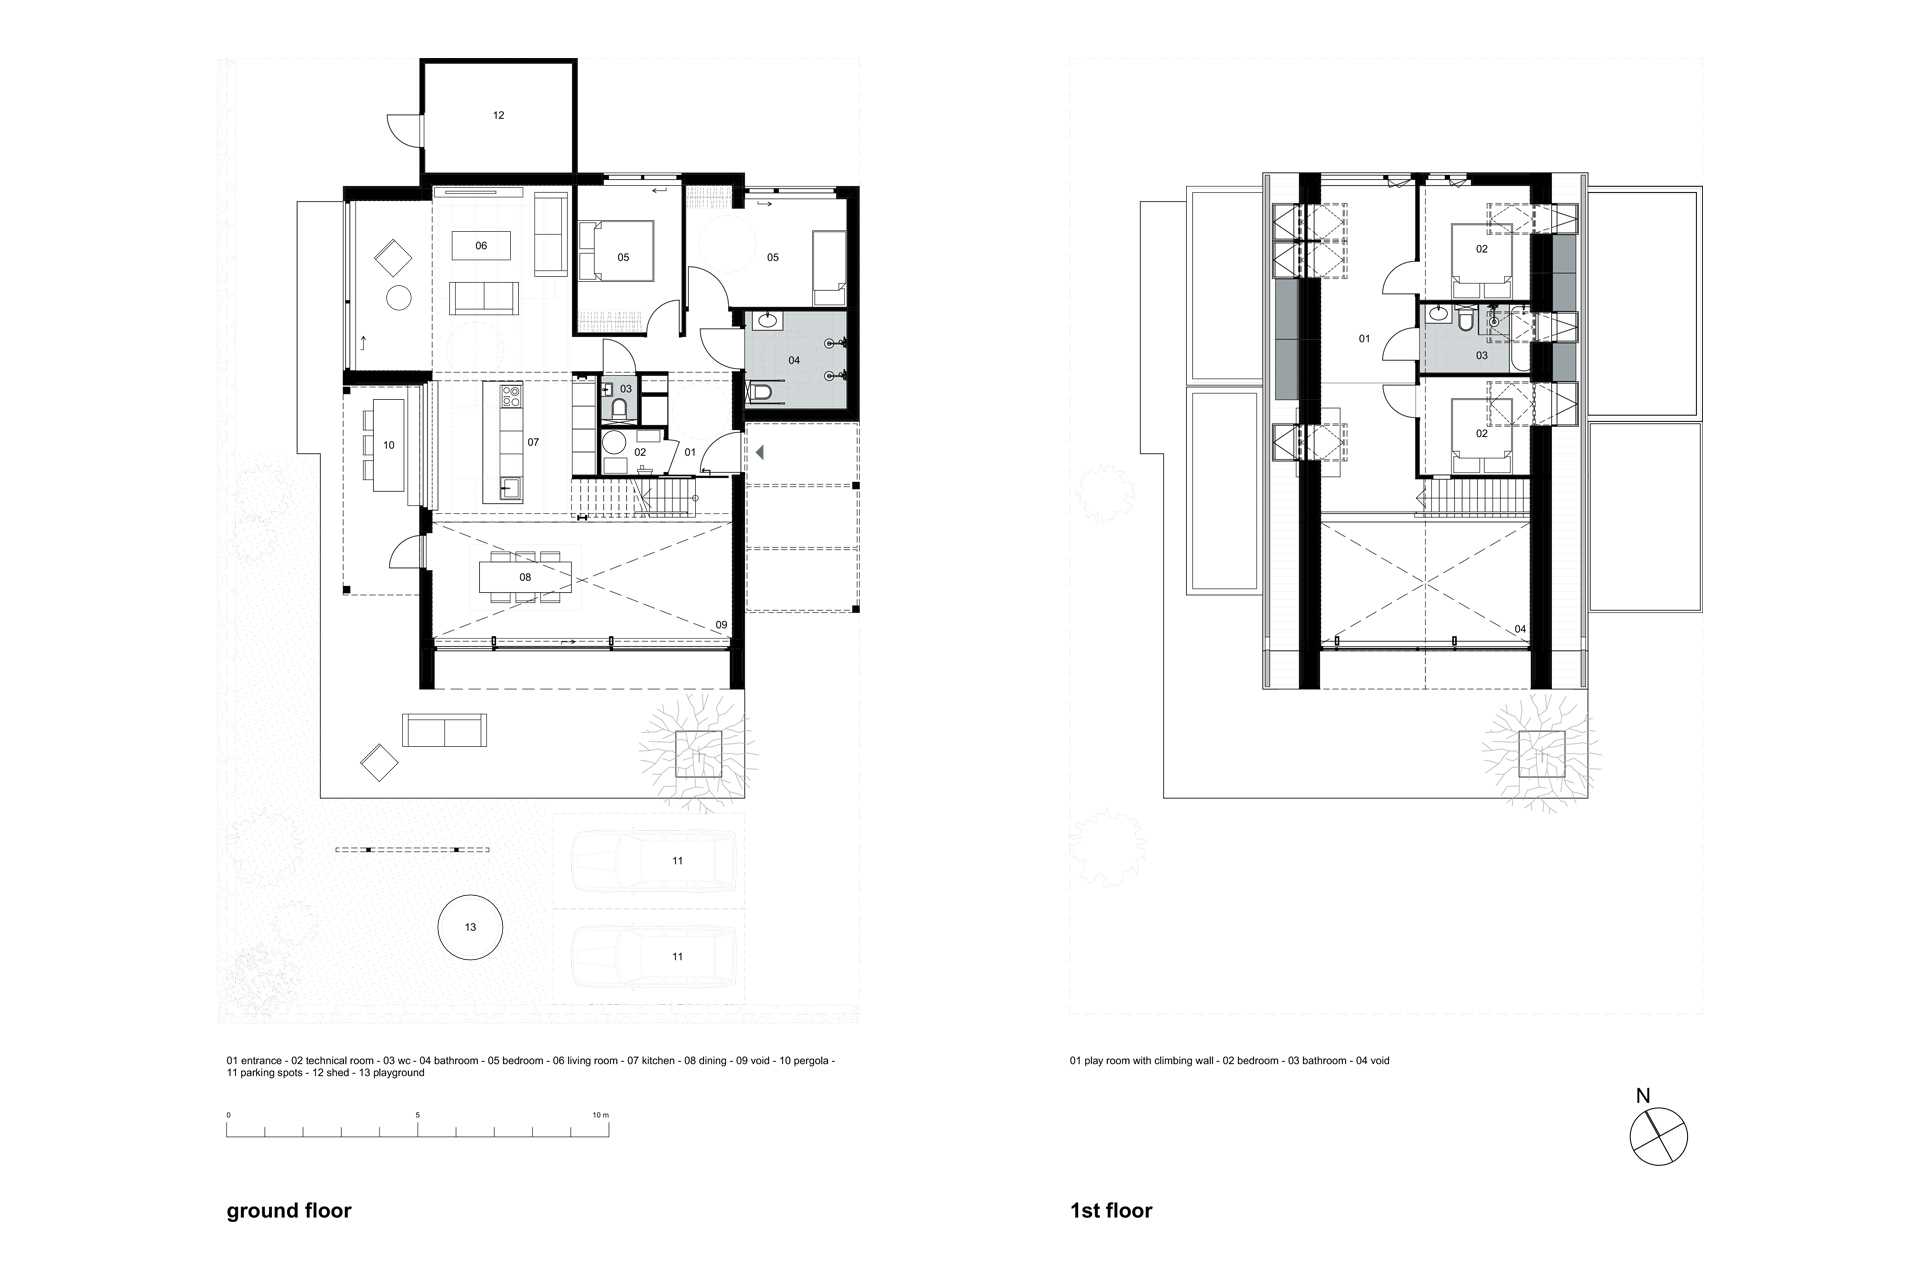 Architectural drawings for a barn-inspired modern home.